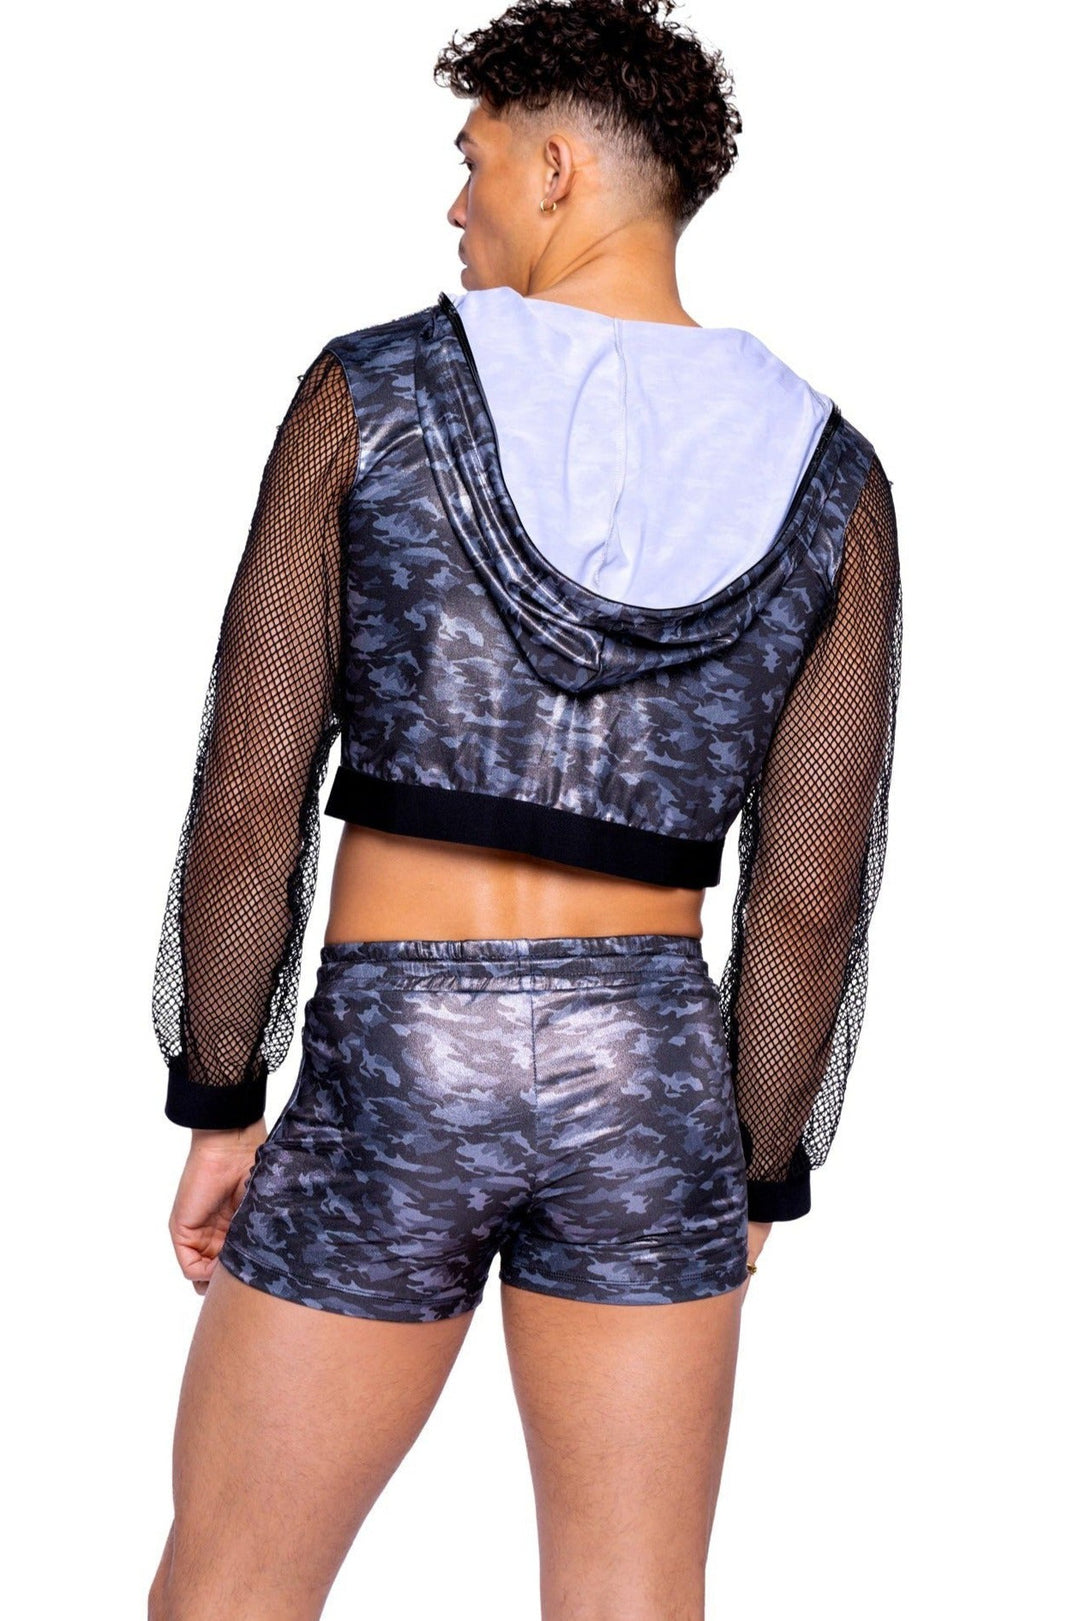 Shimmer Camouflage Cropped Hooded Jacket with Fishnet Sleeves & Stud Detail